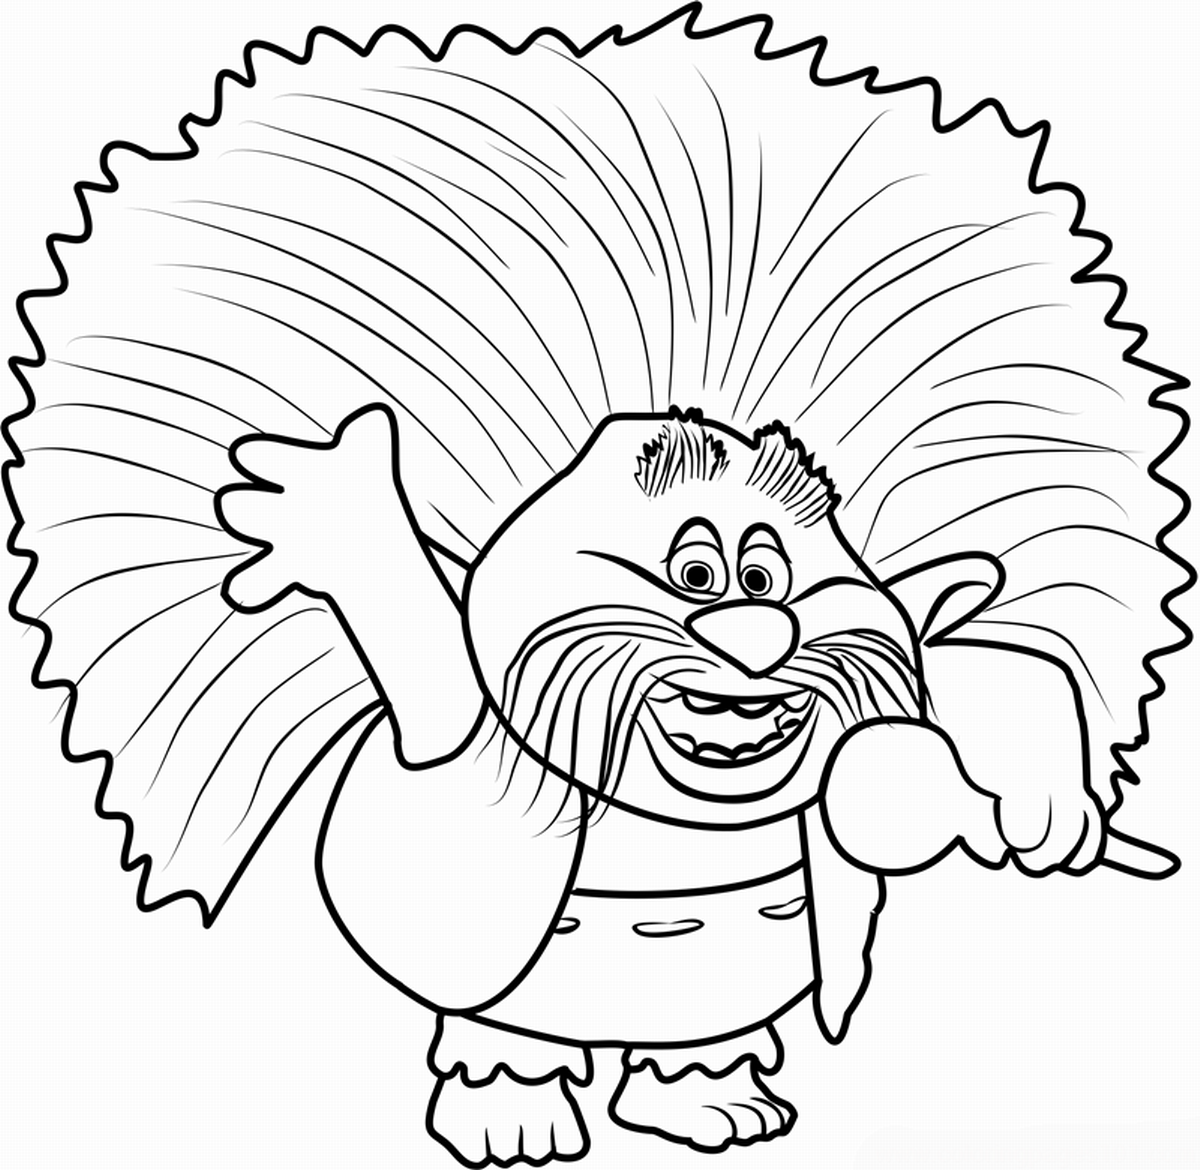 trolls-holiday-movie-coloring-pages